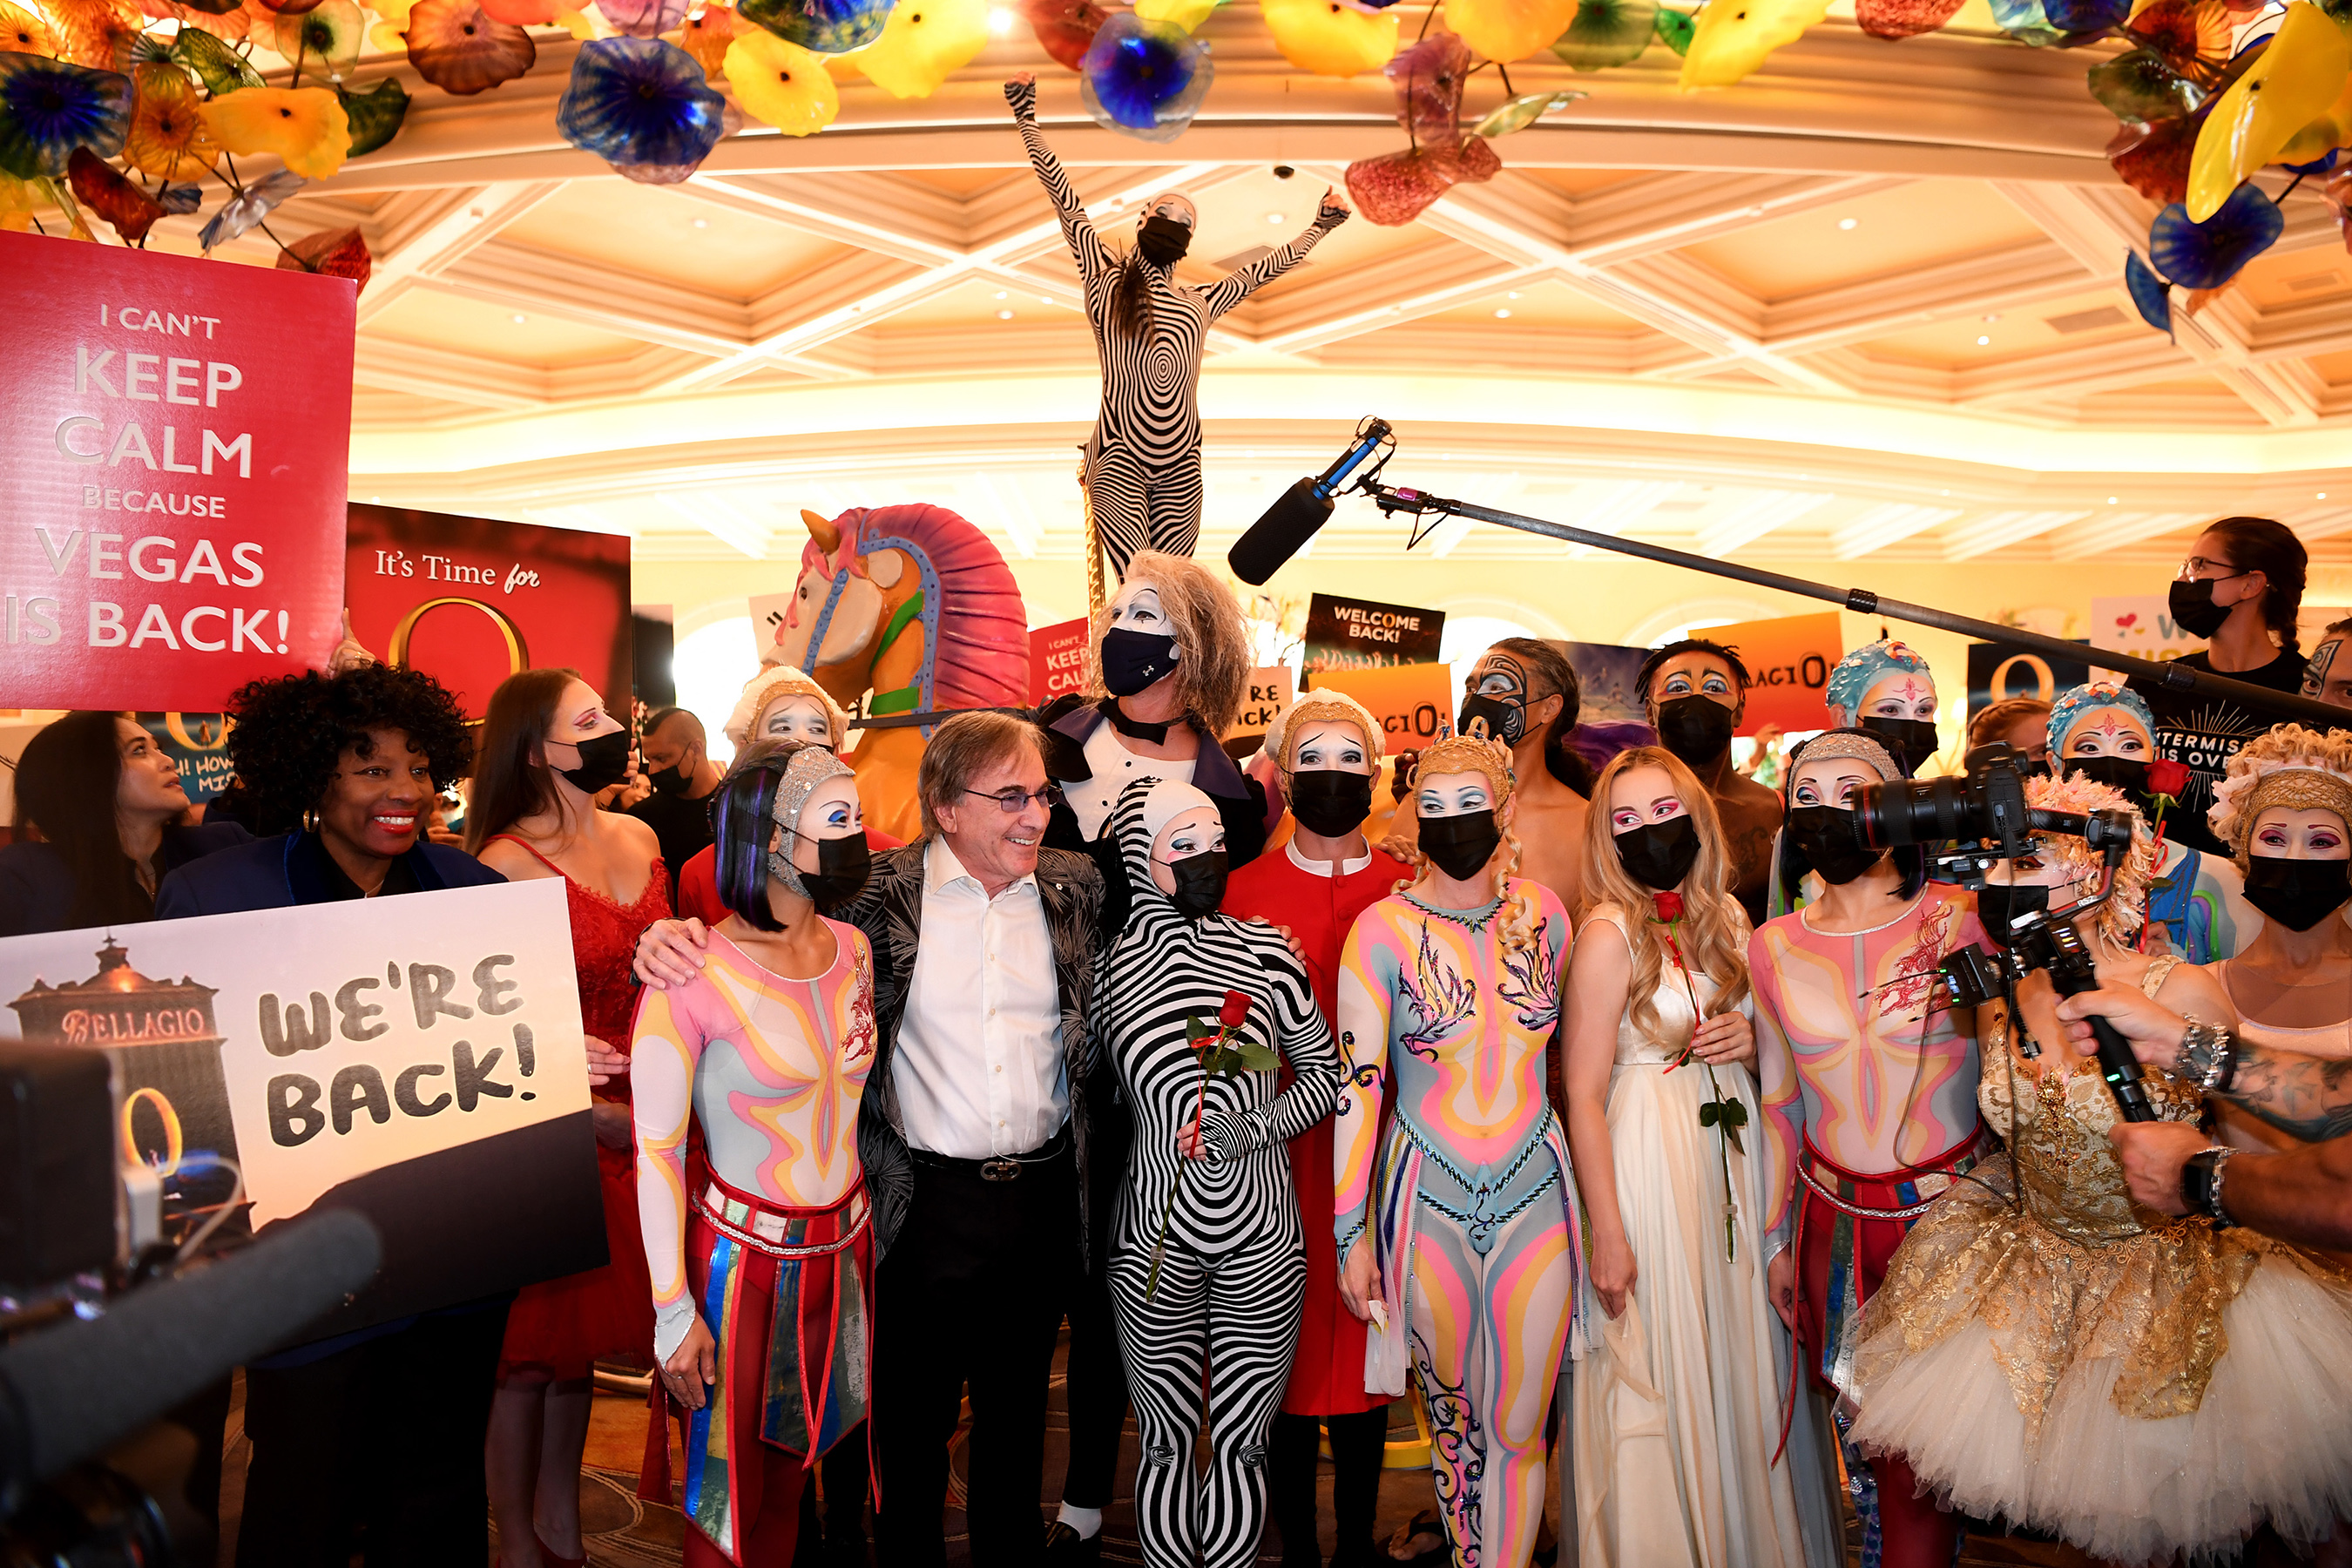 “O” by Cirque du Soleil cast and crew members delight guests at Bellagio as they parade through the resort on reopening night in Las Vegas, July 1, 2021